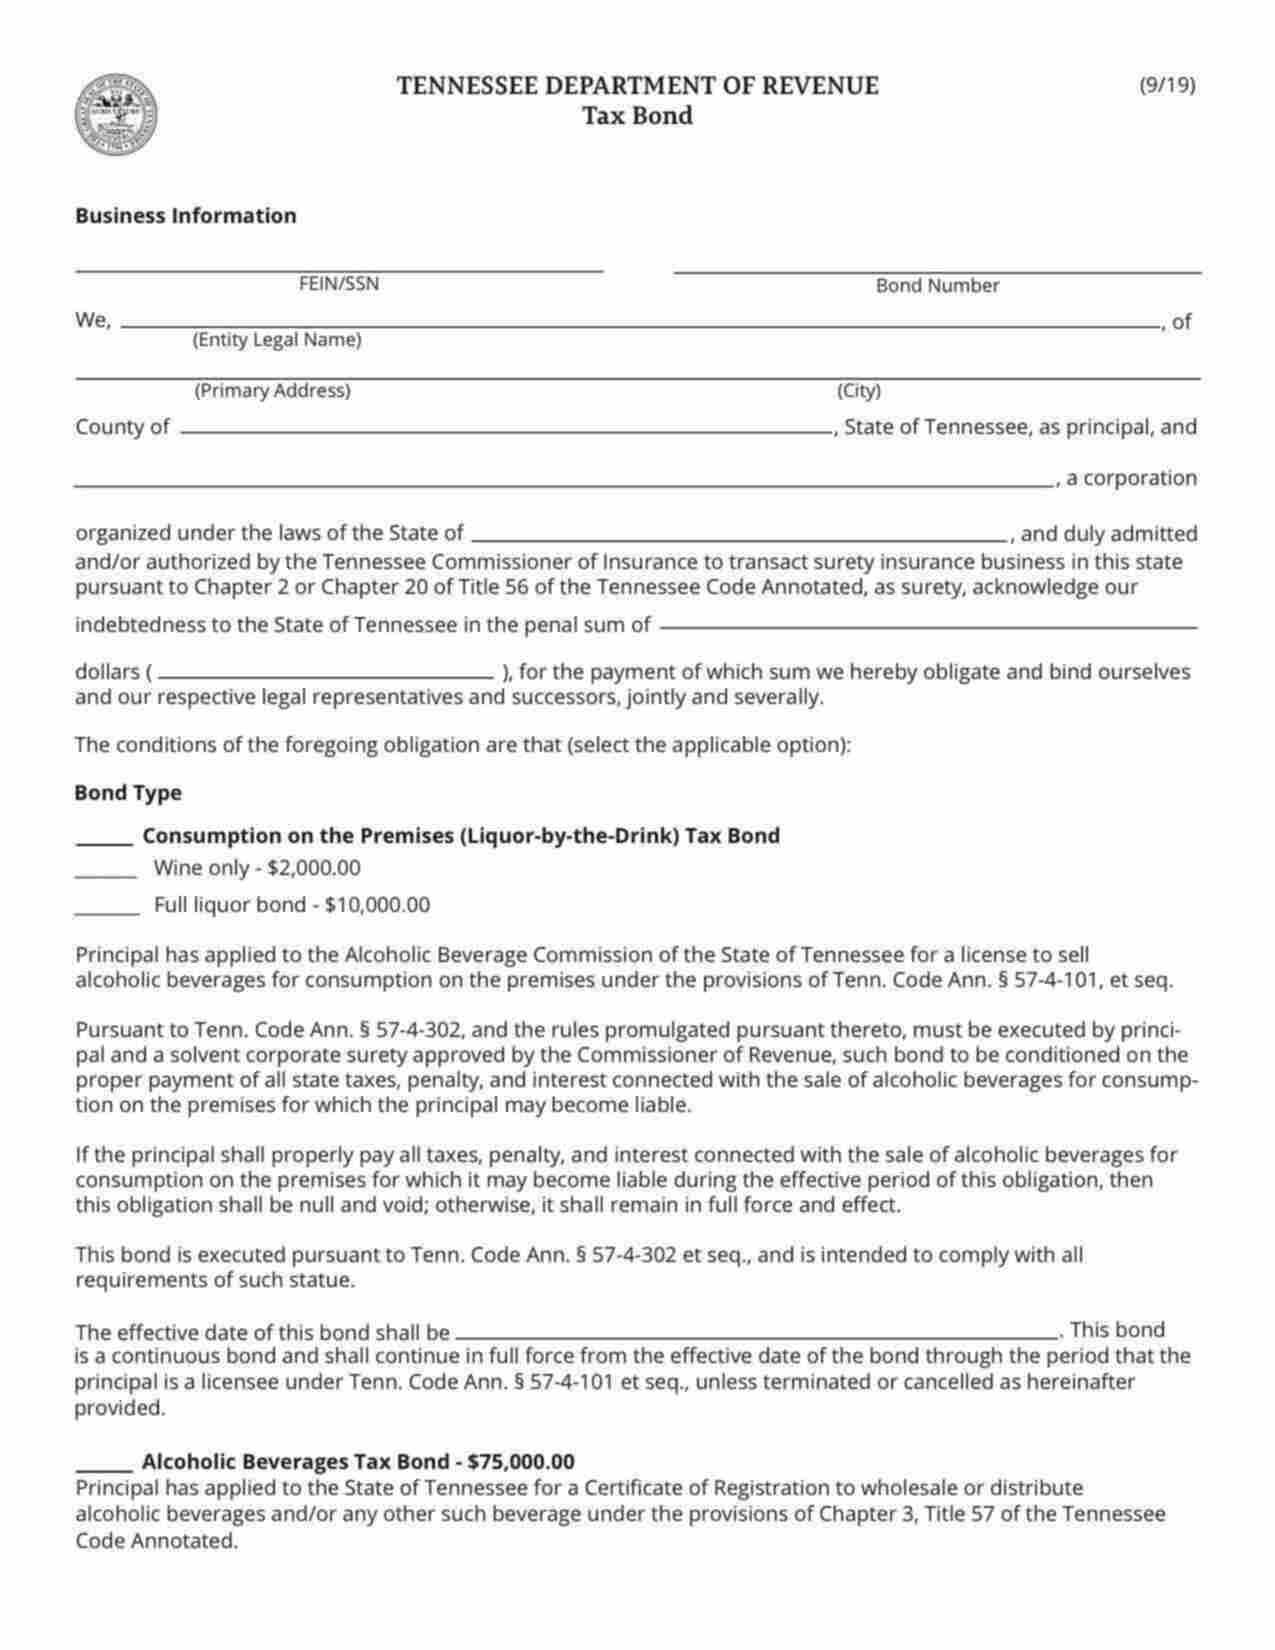 Tennessee Beer Wholesalers Tax Bond Form